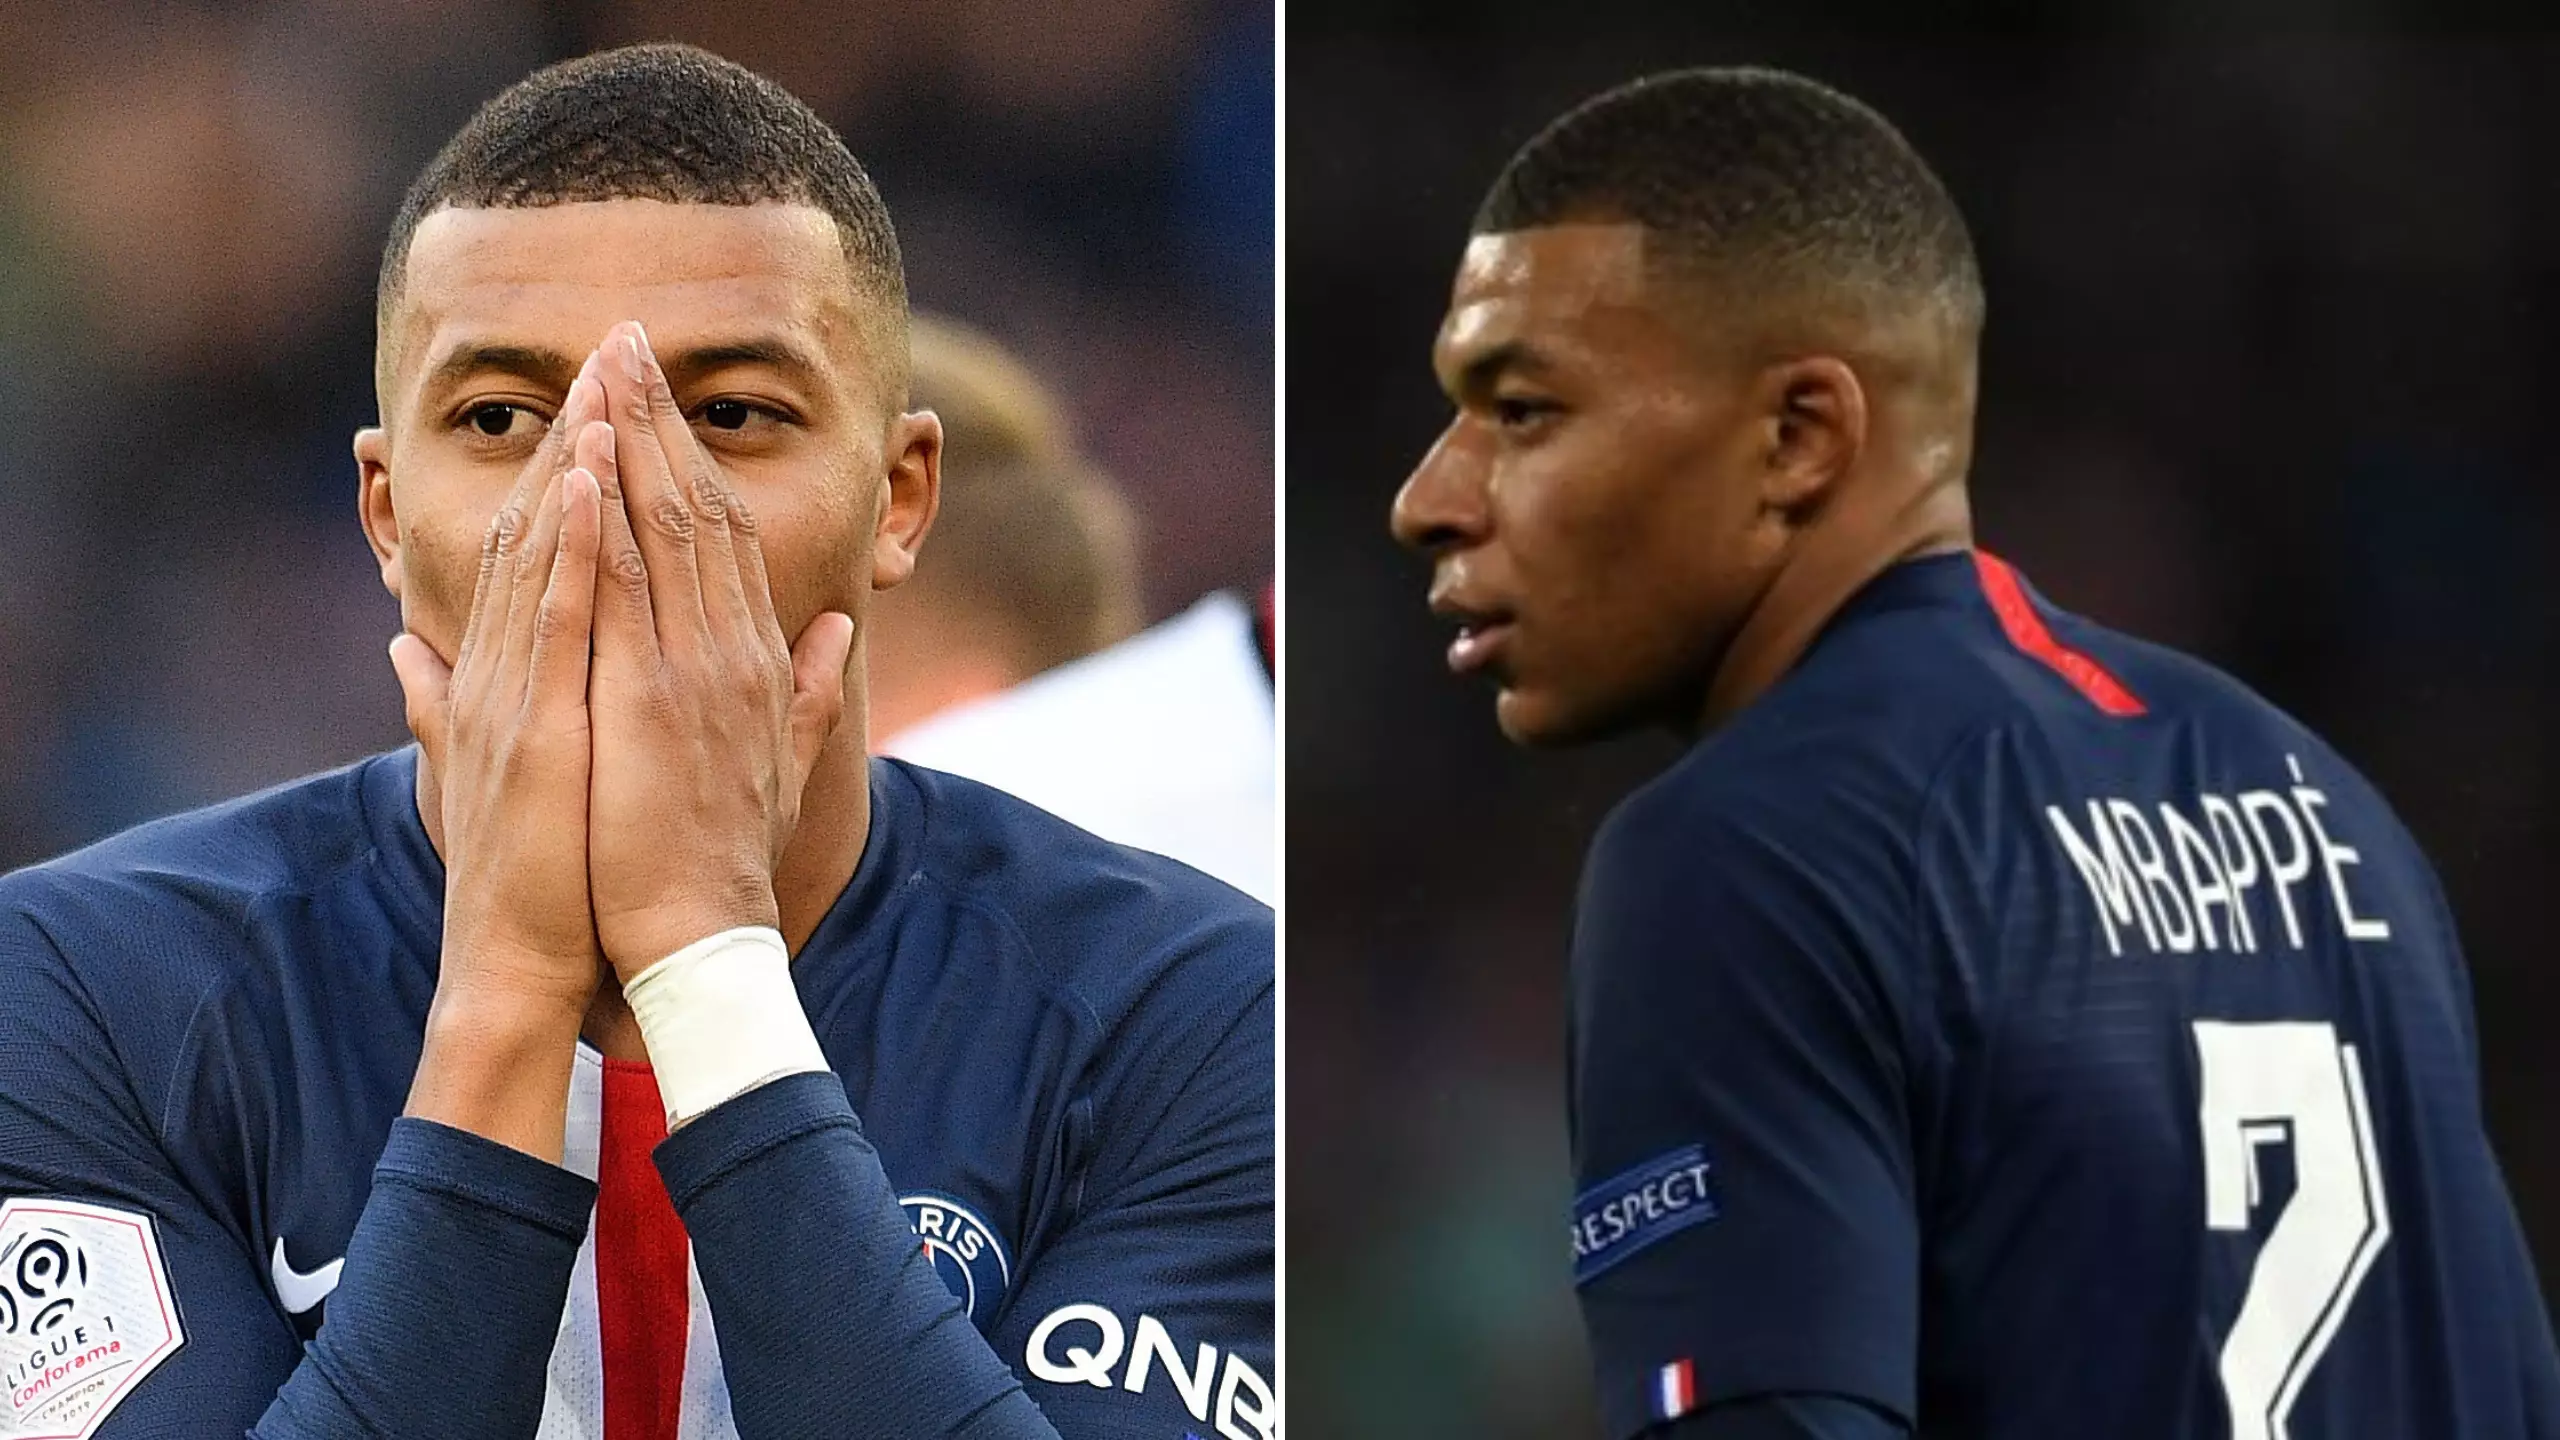 Kylian Mbappe's Transfer Value Could Drop To £30 Million This Summer